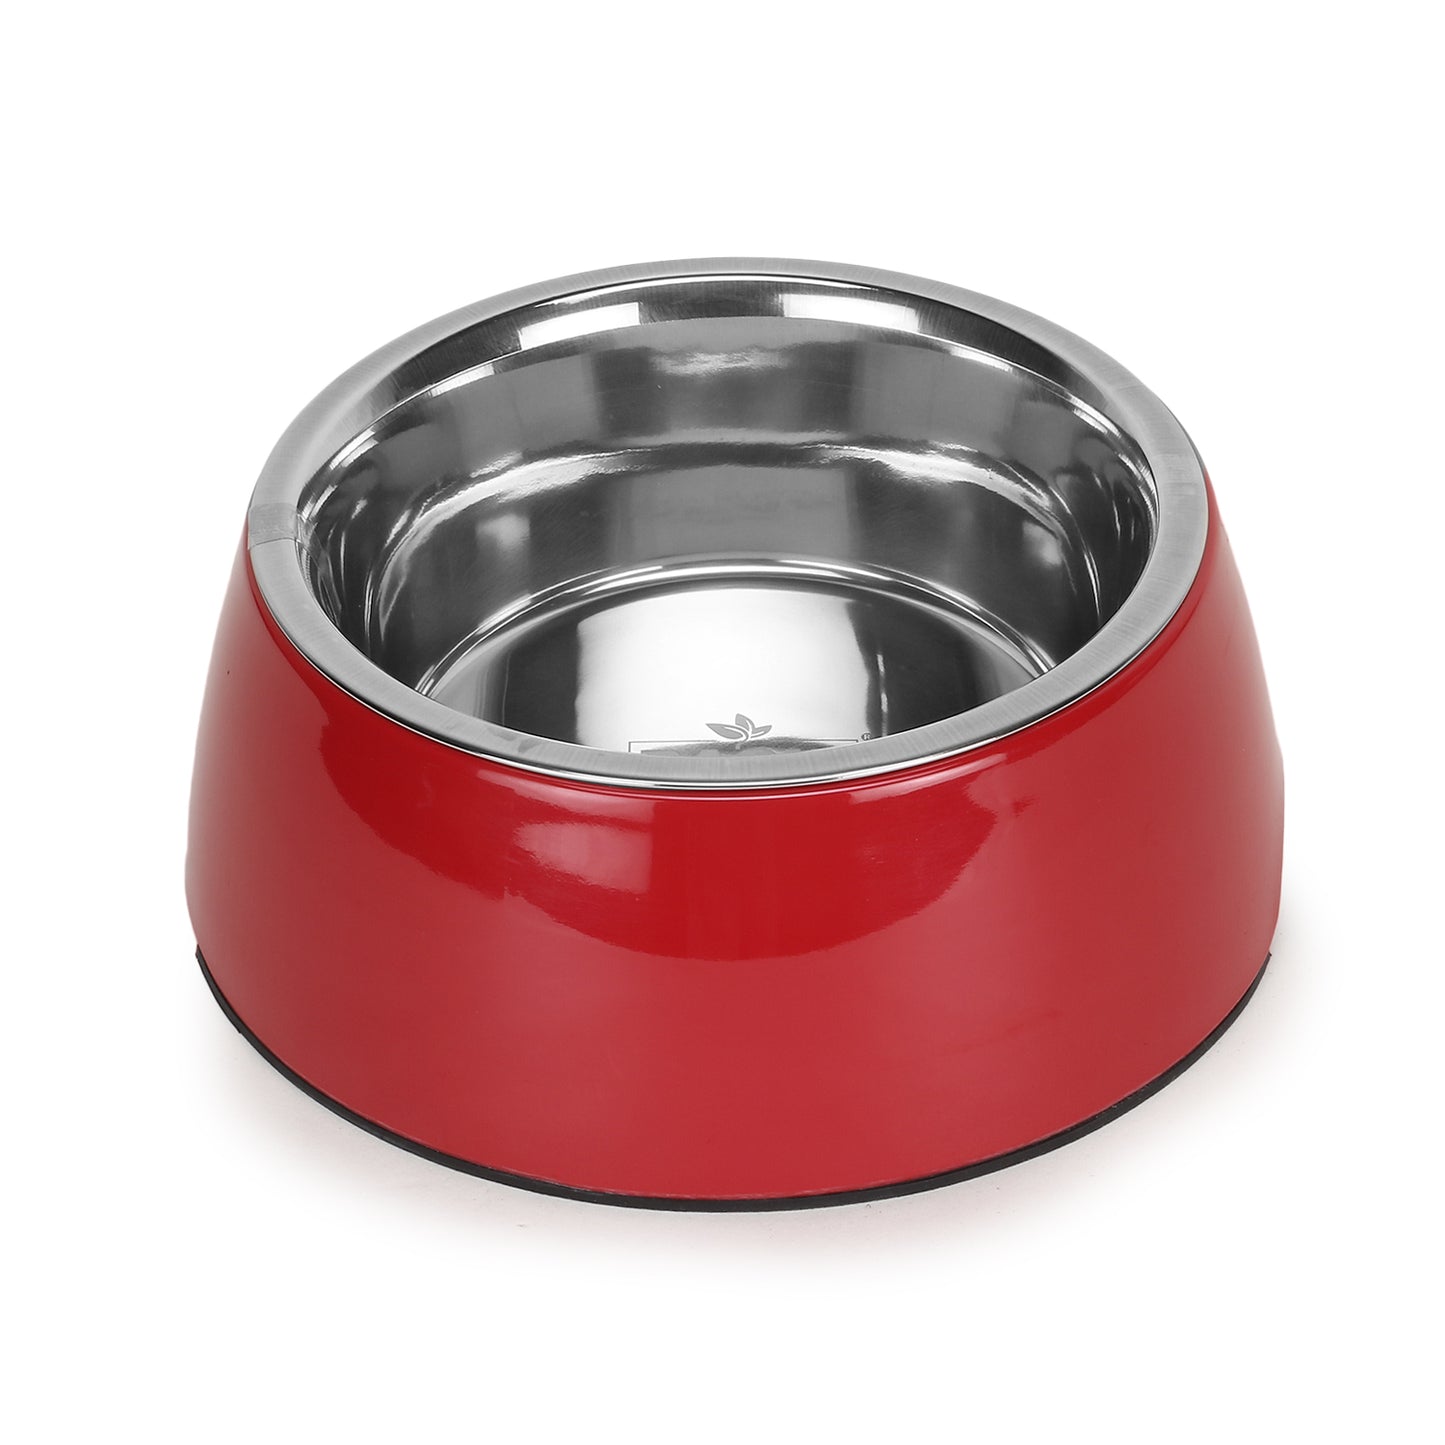 BASIL Solid Red Pet Feeding Bowl Set, Melamine and Stainless Steel